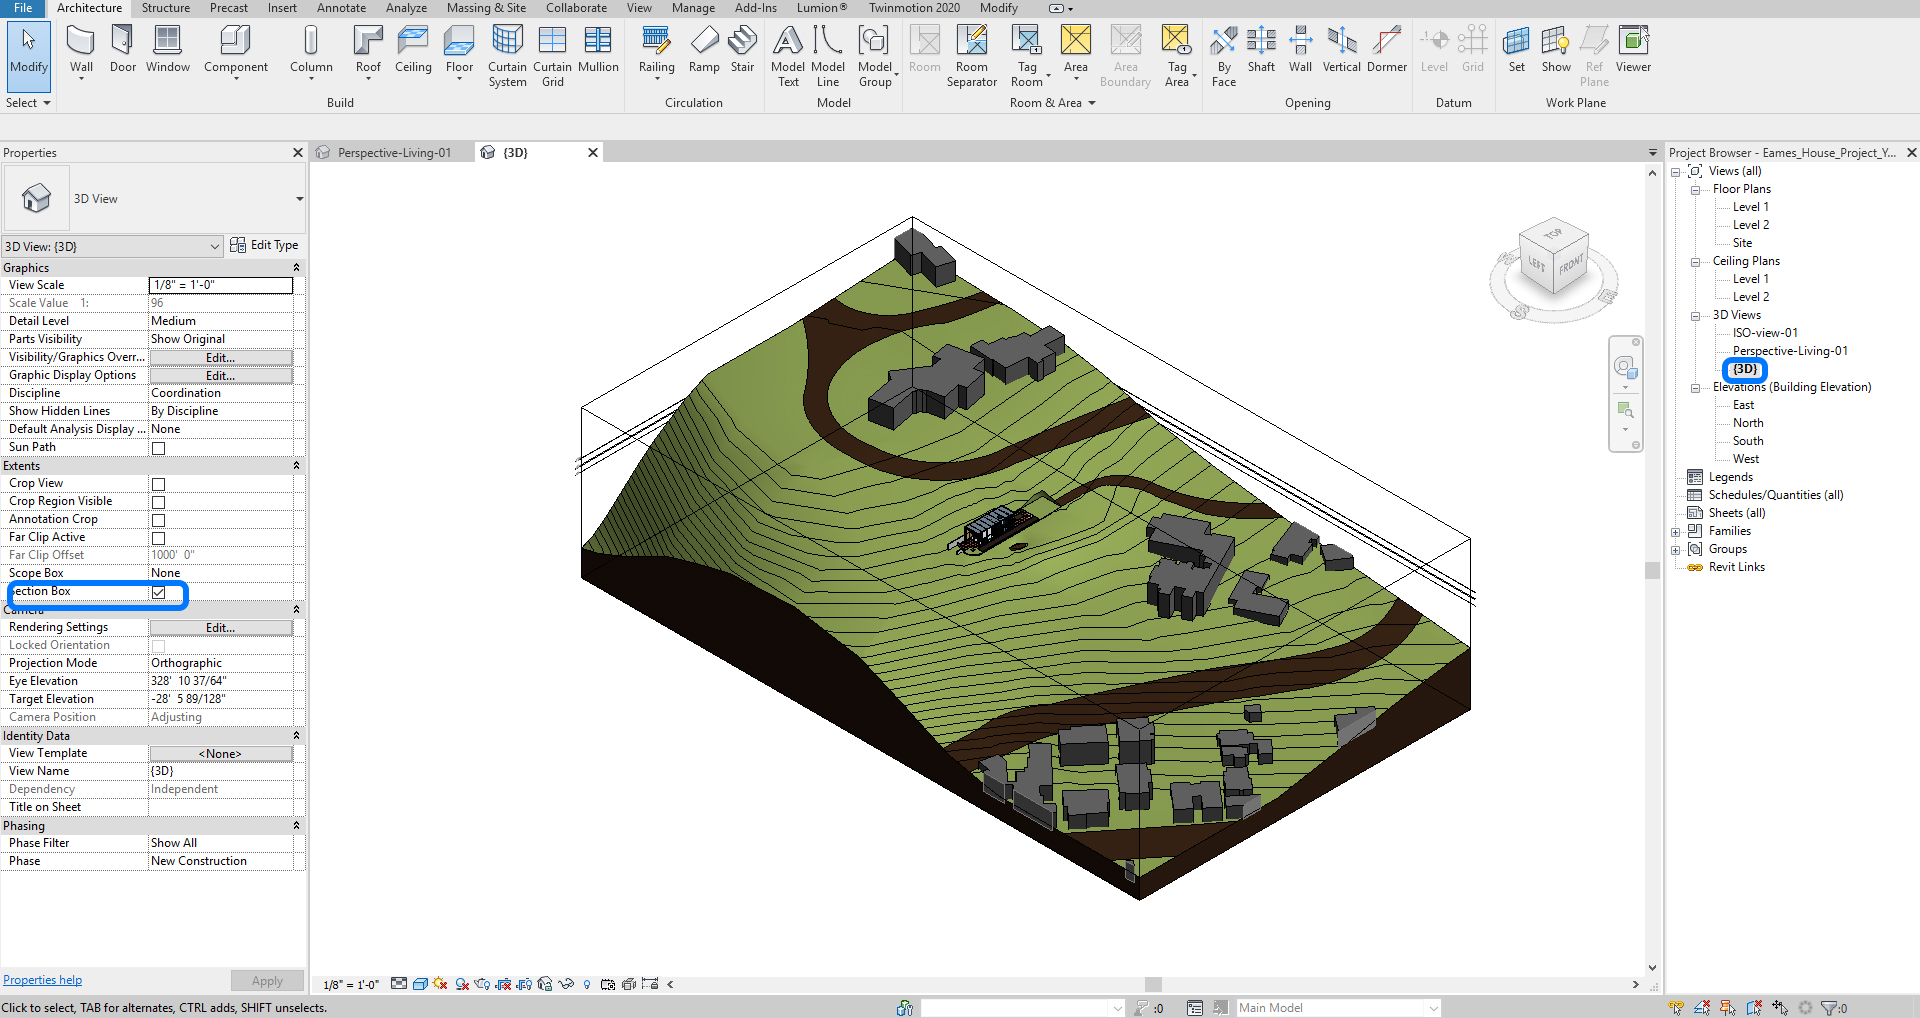 It indicates how to prepare your Revit model for Lumion